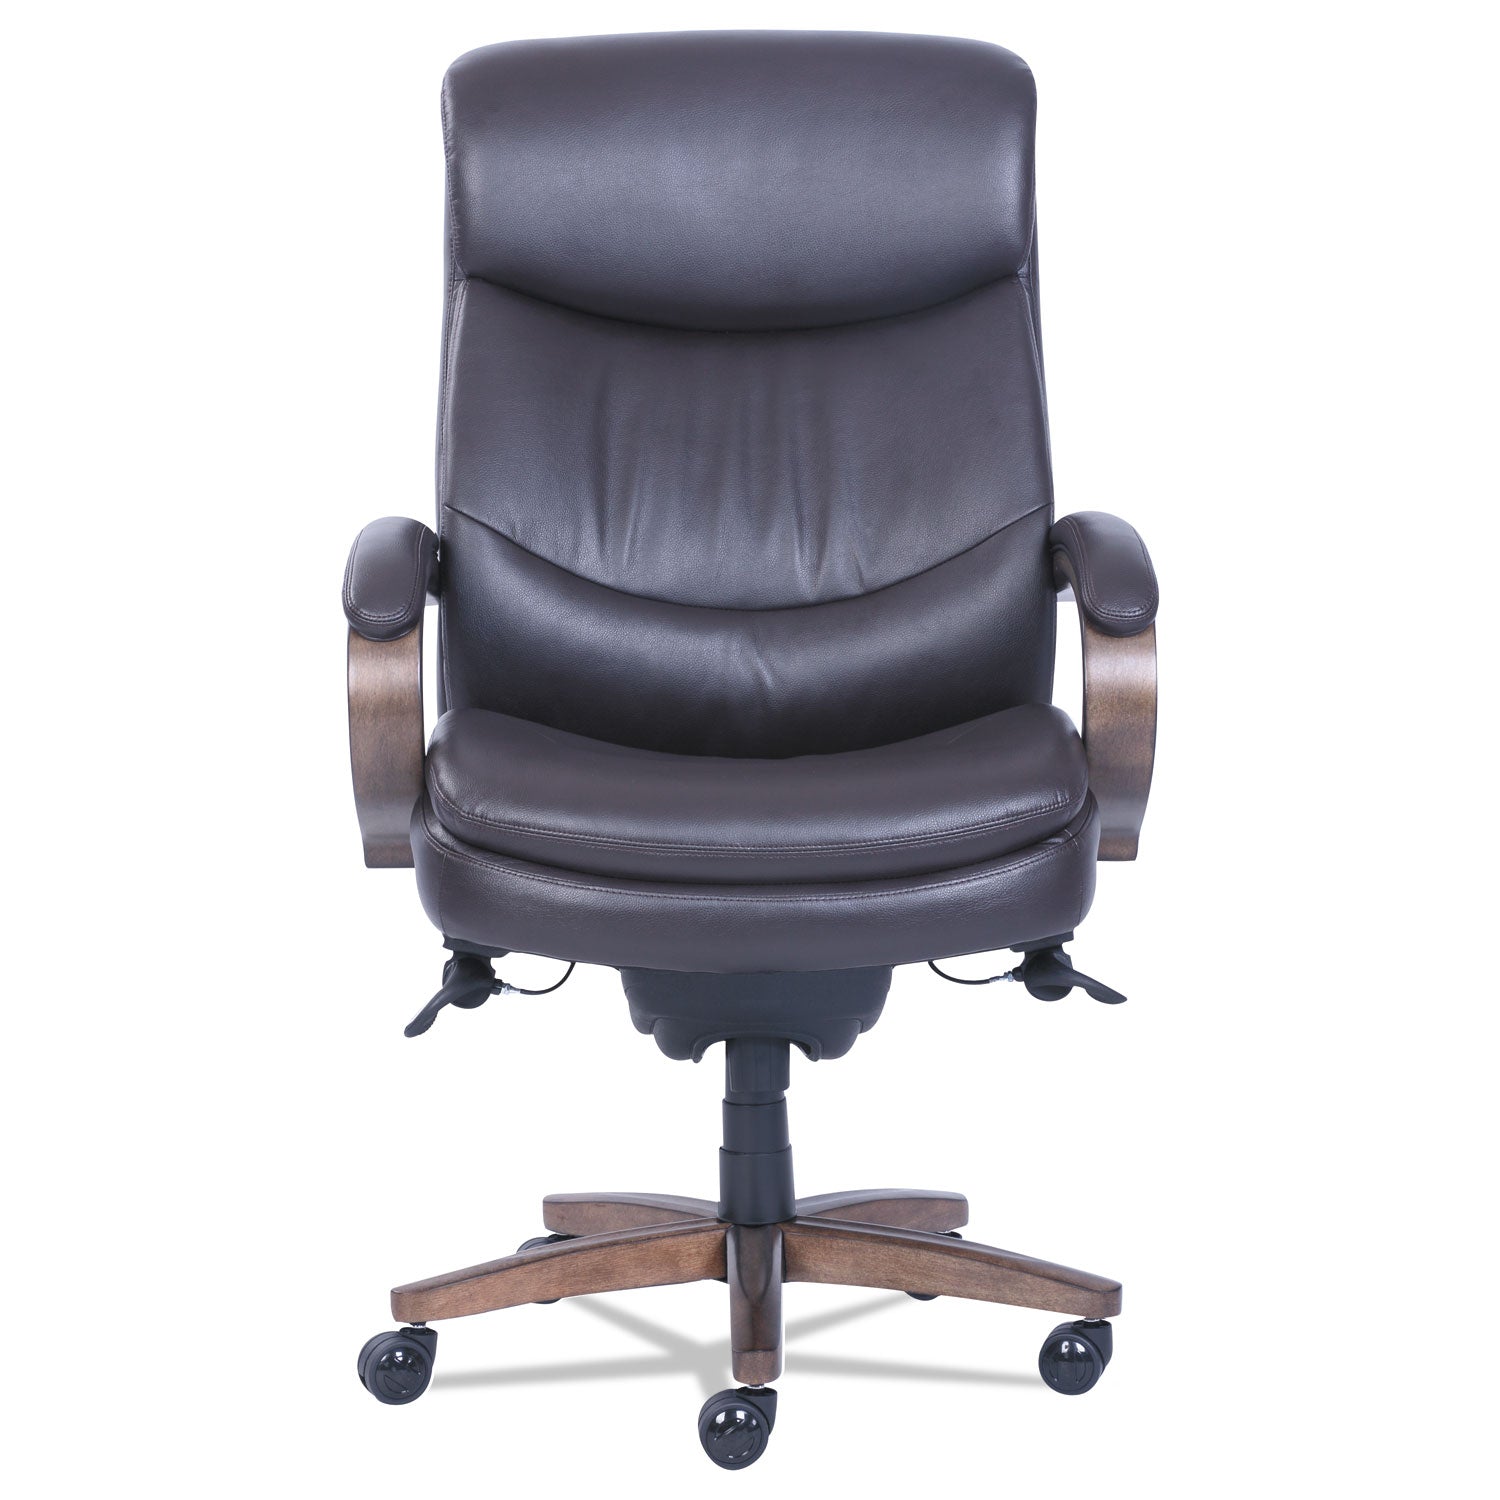 woodbury-big-tall-executive-chair-supports-up-to-400-lb-2025-to-2325-seat-height-brown-seat-back-weathered-sand-base_lzb48961b - 2